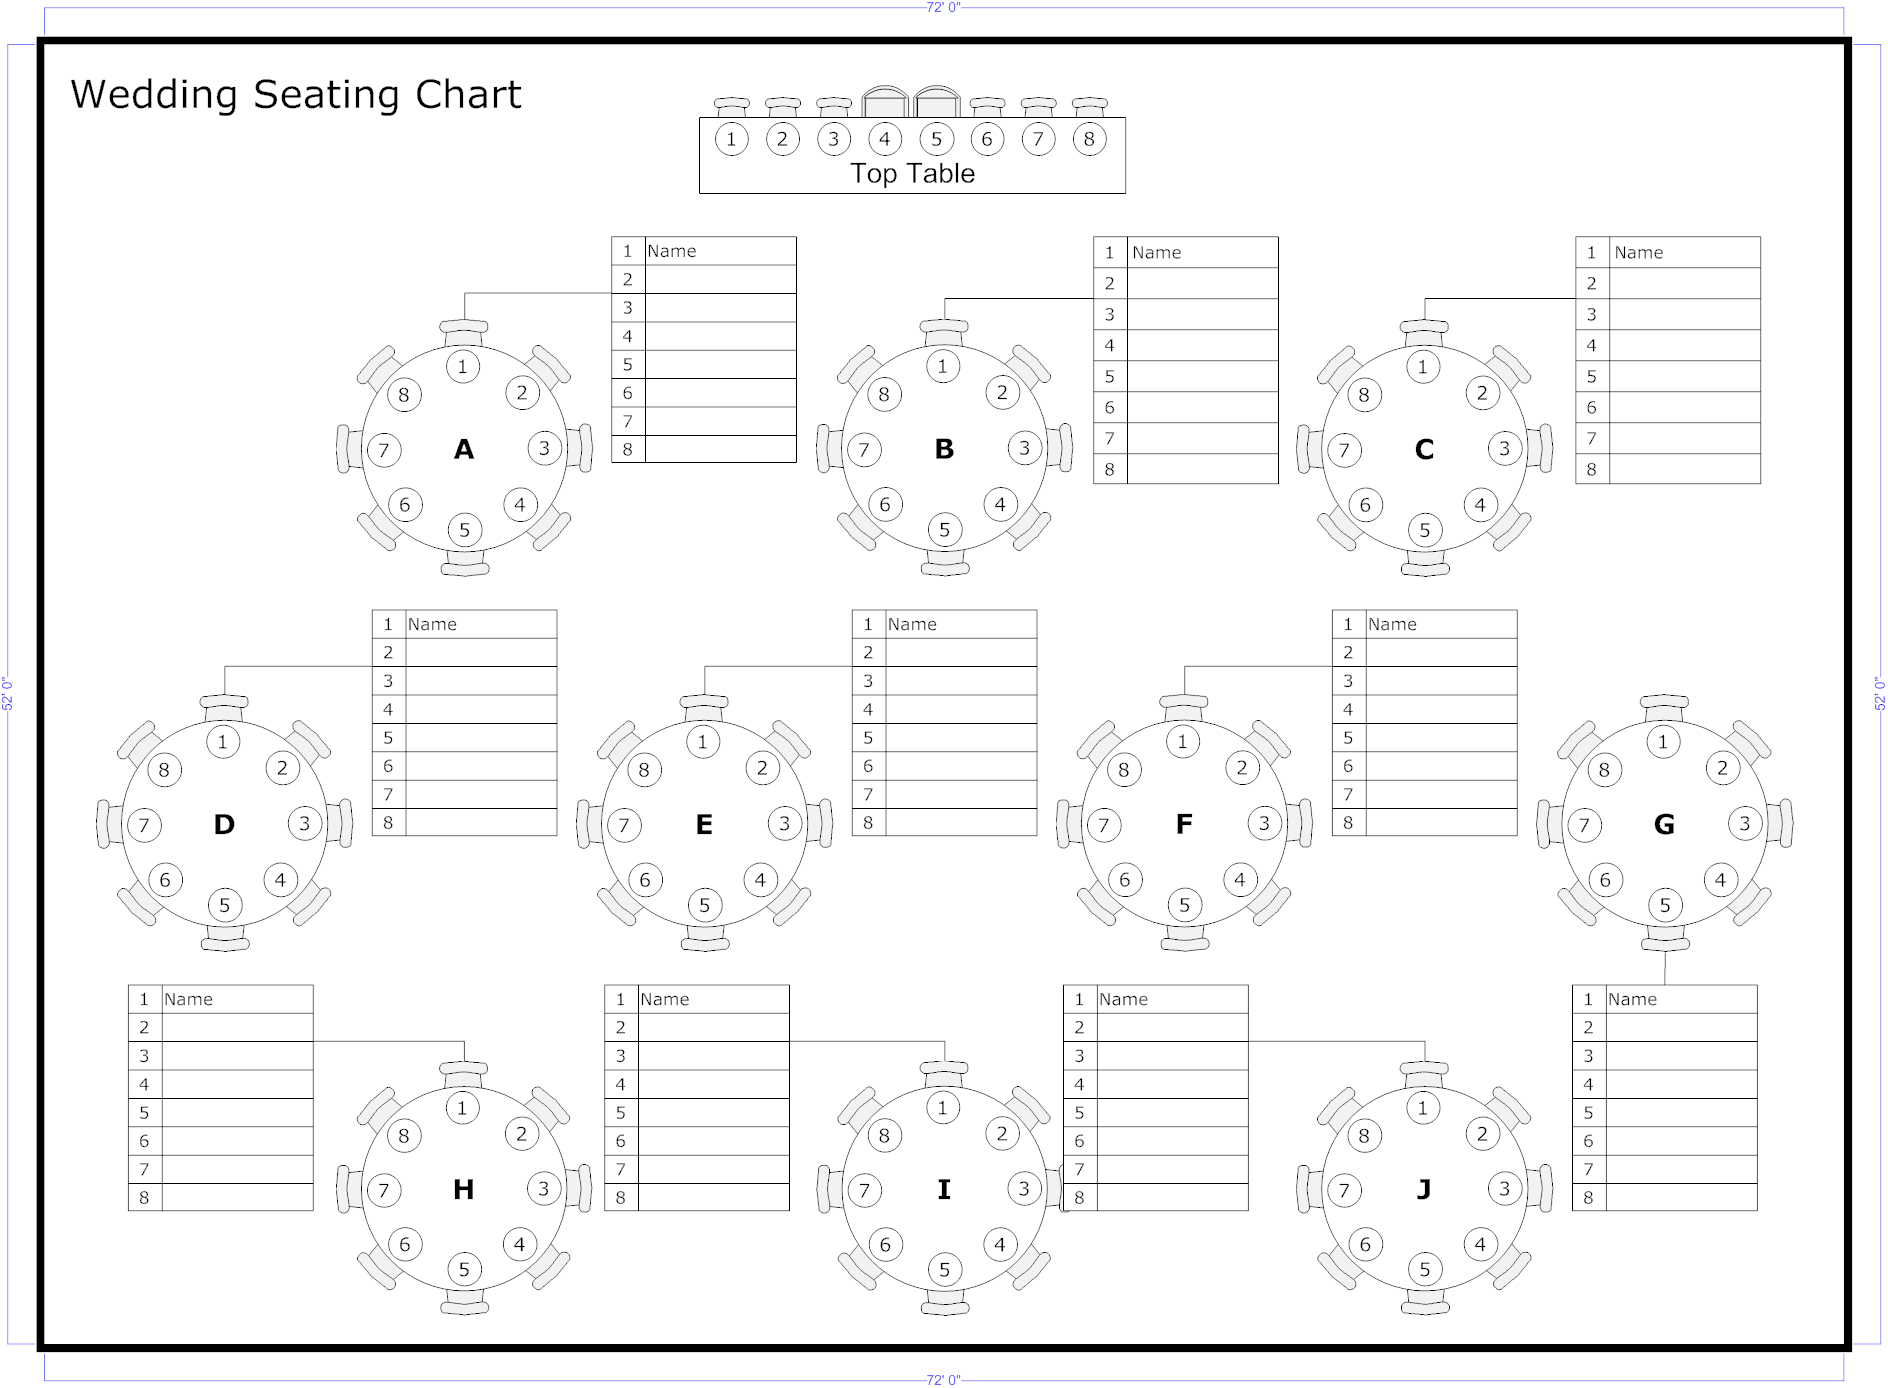 Tips To Seat Your Wedding Guests | Organized | Seating Chart Wedding - Free Printable Wedding Seating Chart Template